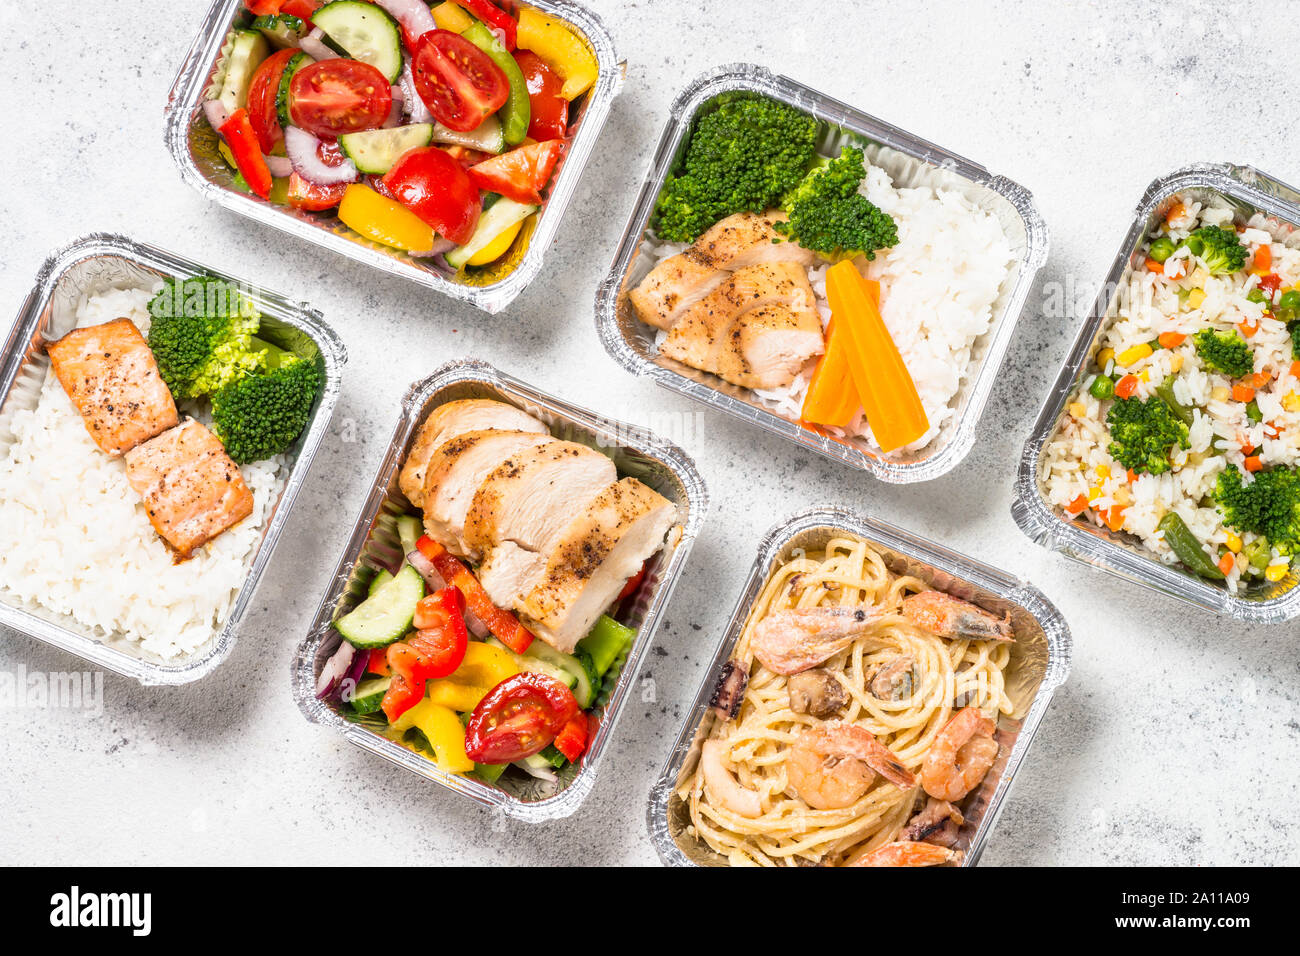 Food delivery concept - healthy lunch in boxes. Stock Photo